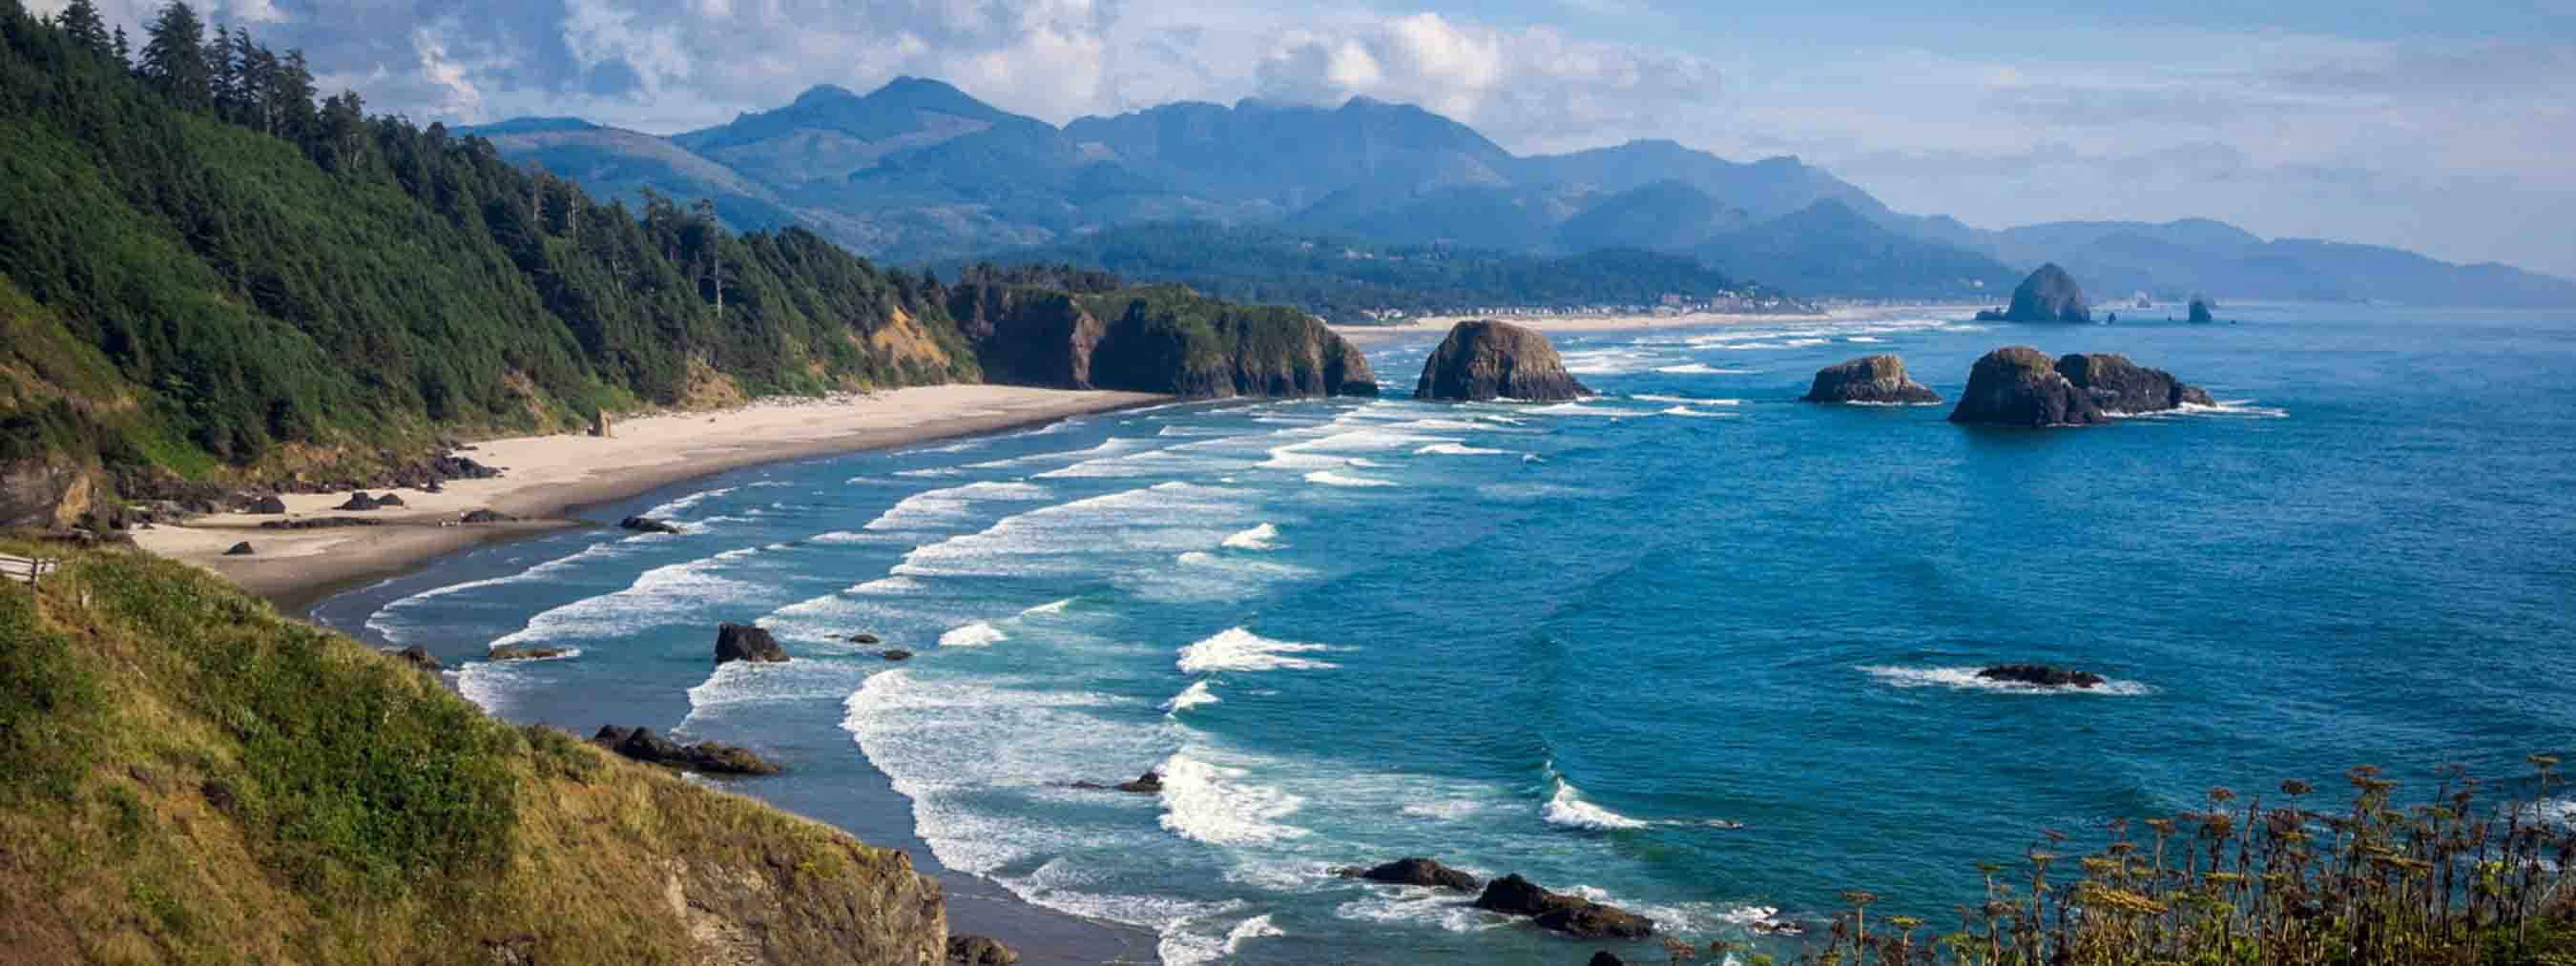 Cannon Beach is in the middle of some of the most scenic hiking trails